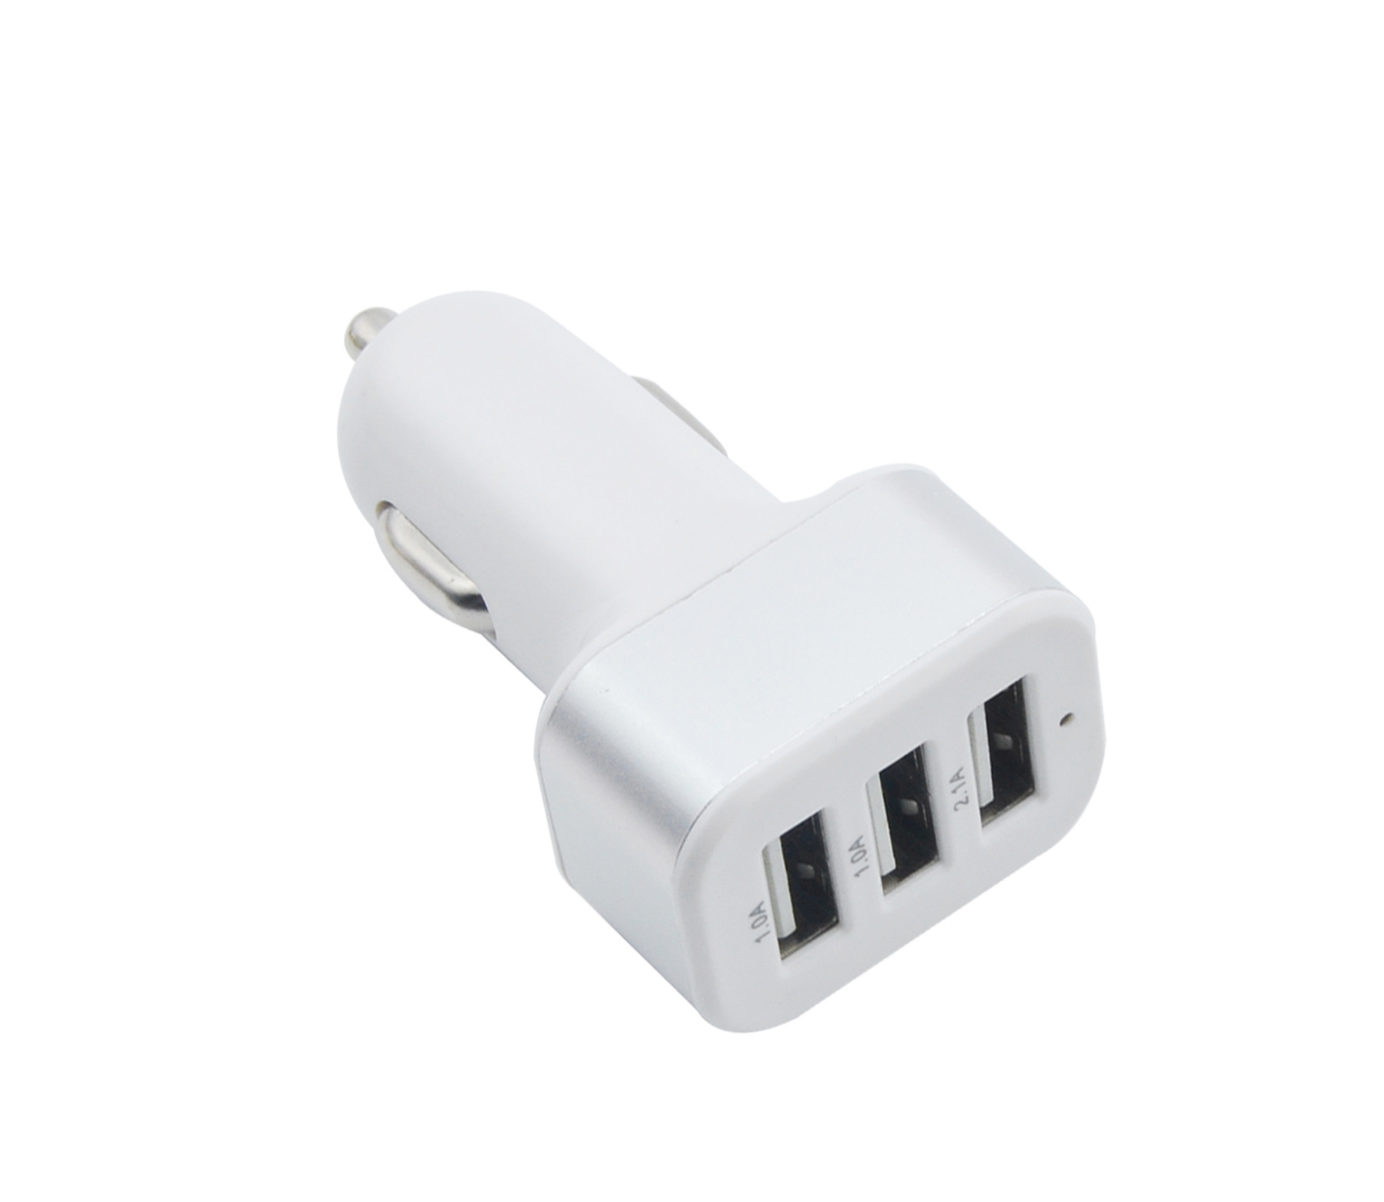 Shenzhen factory supply Aluminium frame 3 USB car charger phone tablet chargers